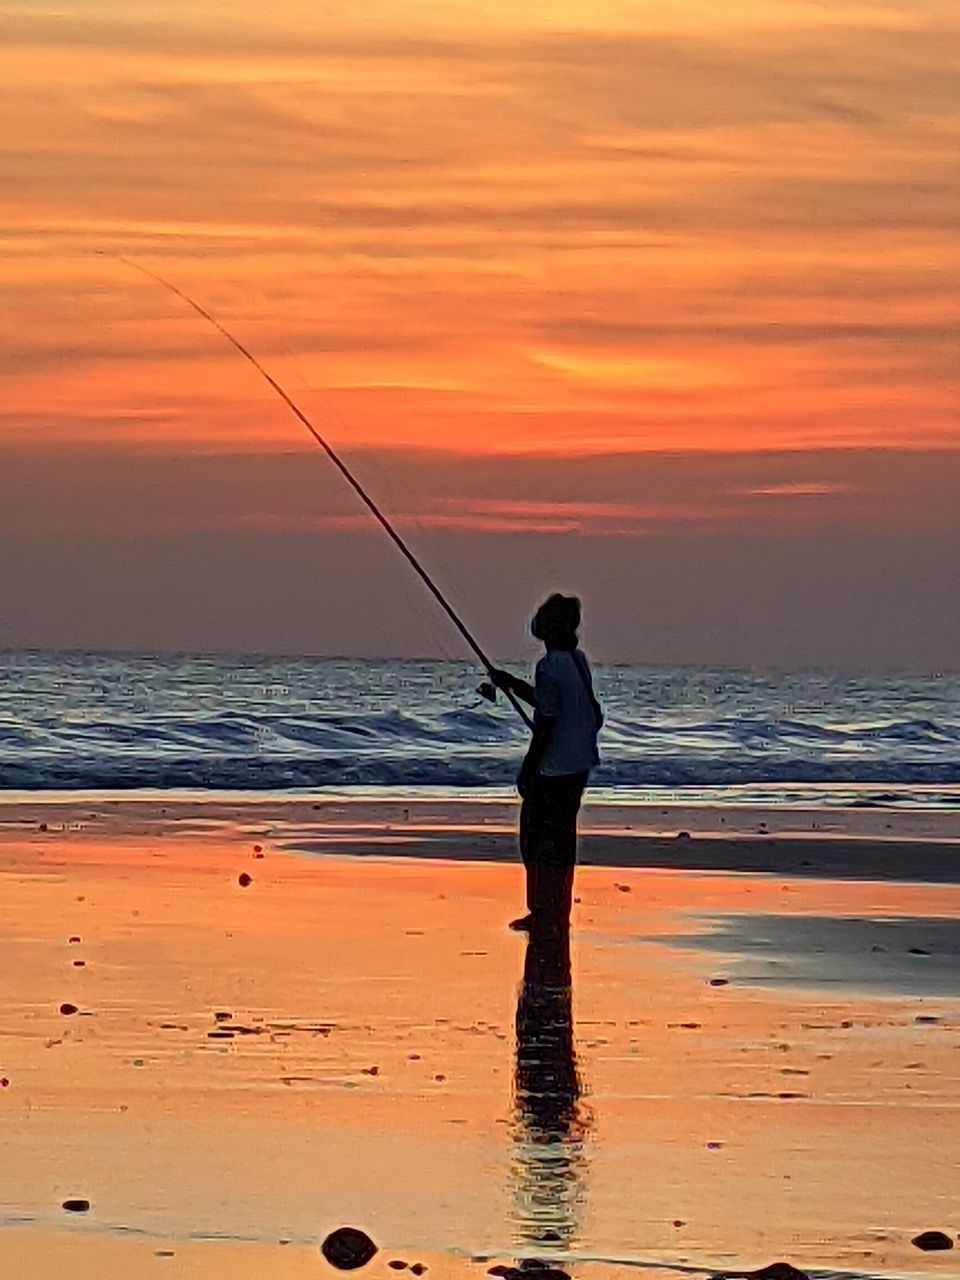 water, sea, fishing, sunset, sky, beach, land, one person, shore, nature, beauty in nature, activity, rod, fishing rod, ocean, horizon, orange color, men, leisure activity, silhouette, horizon over water, coast, standing, sports, full length, lifestyles, casting, motion, scenics - nature, holiday, vacation, sun, fisherman, adult, trip, cloud, wave, dusk, idyllic, sand, holding, reflection, body of water, outdoors, tranquility, occupation, travel destinations, tranquil scene, weekend activities, summer, recreation, angling, person